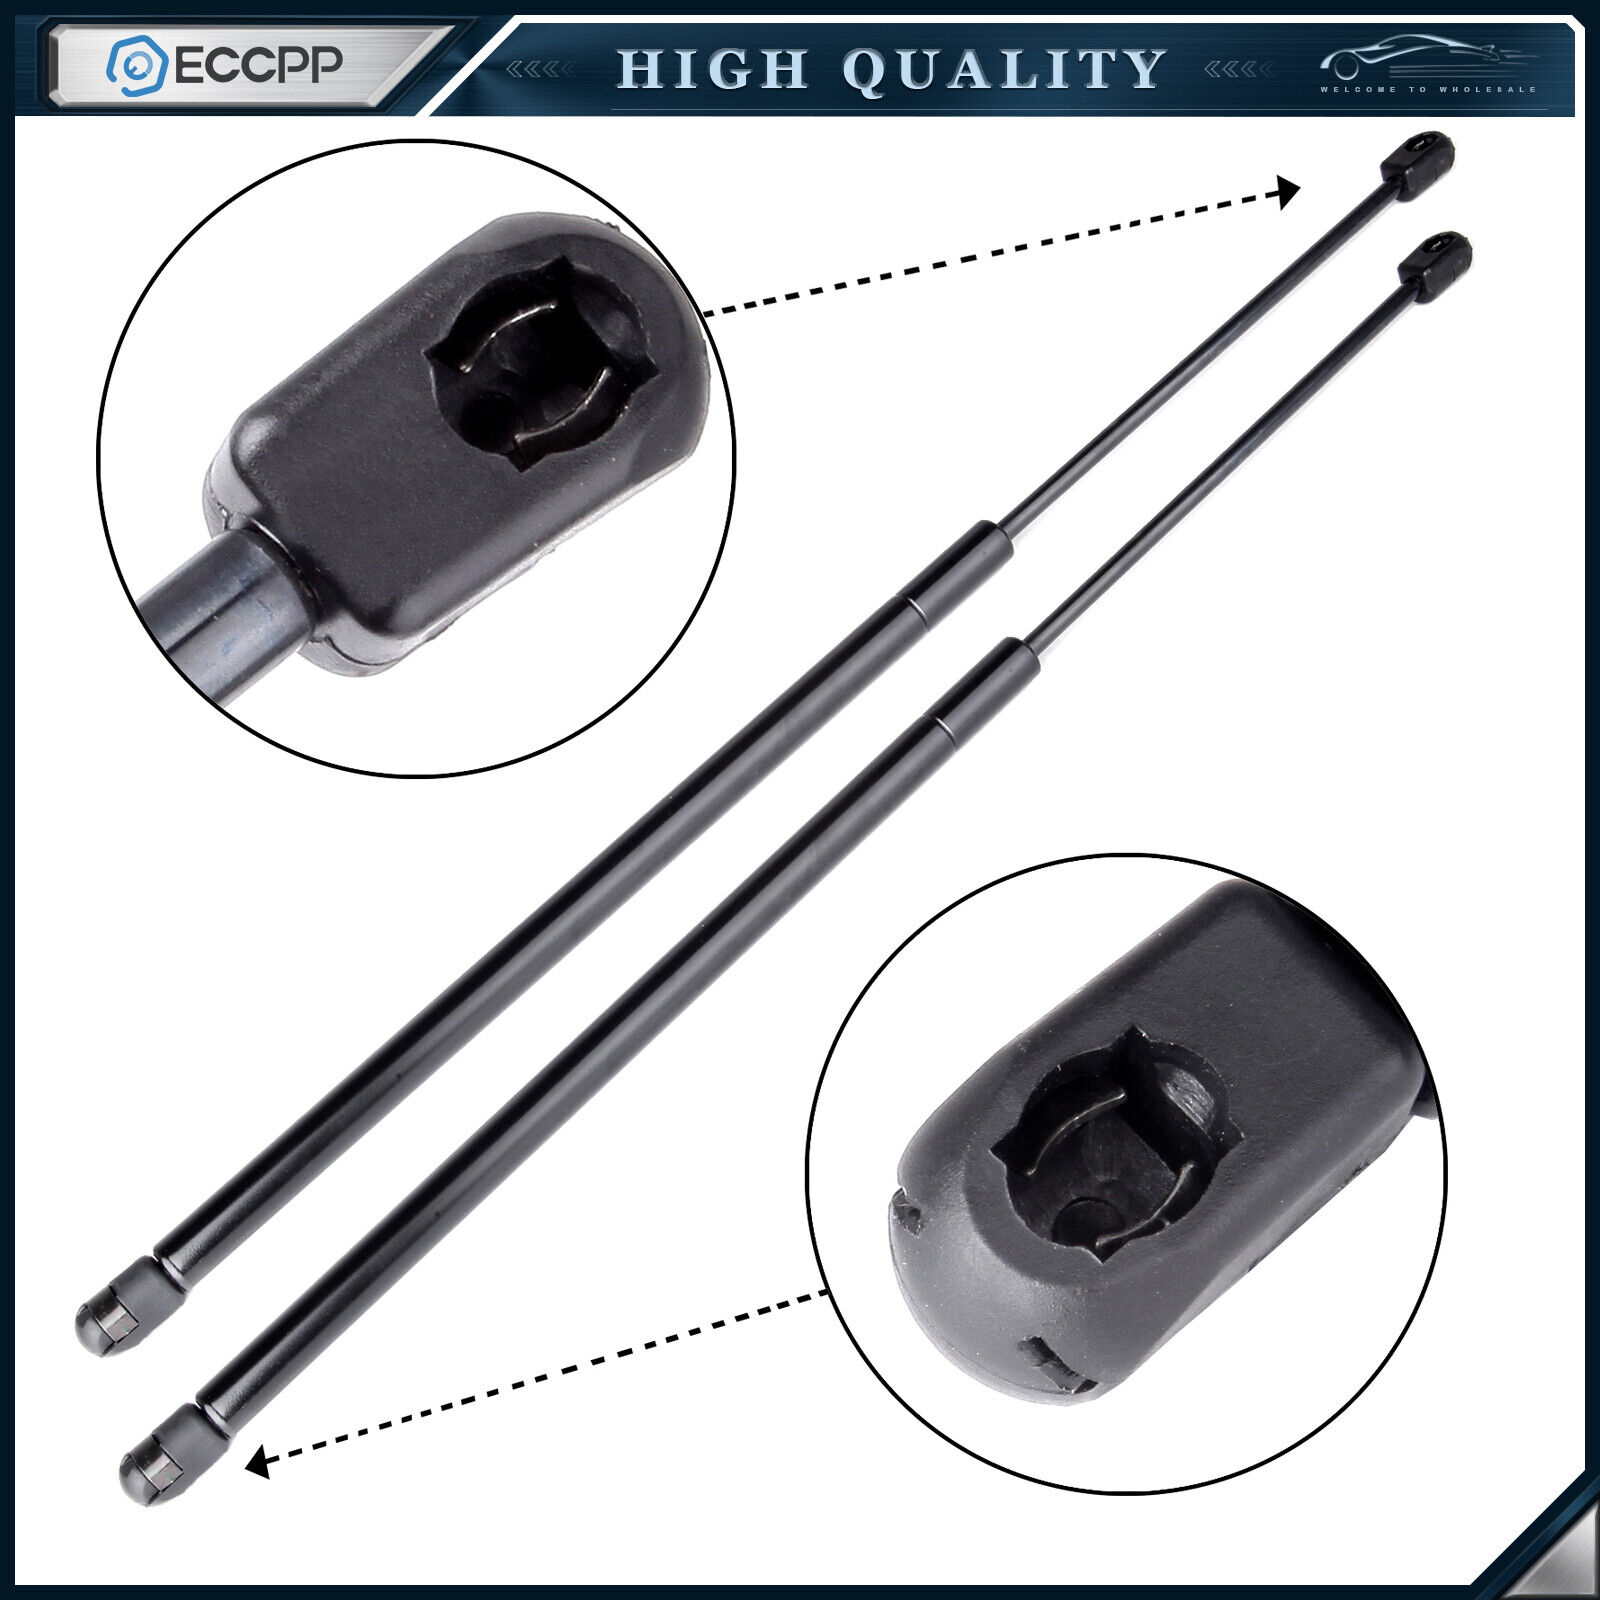 ECCPP 2x Rear Liftgate  Lift Supports Shock For Cadillac Escalade 1999-2000 4557